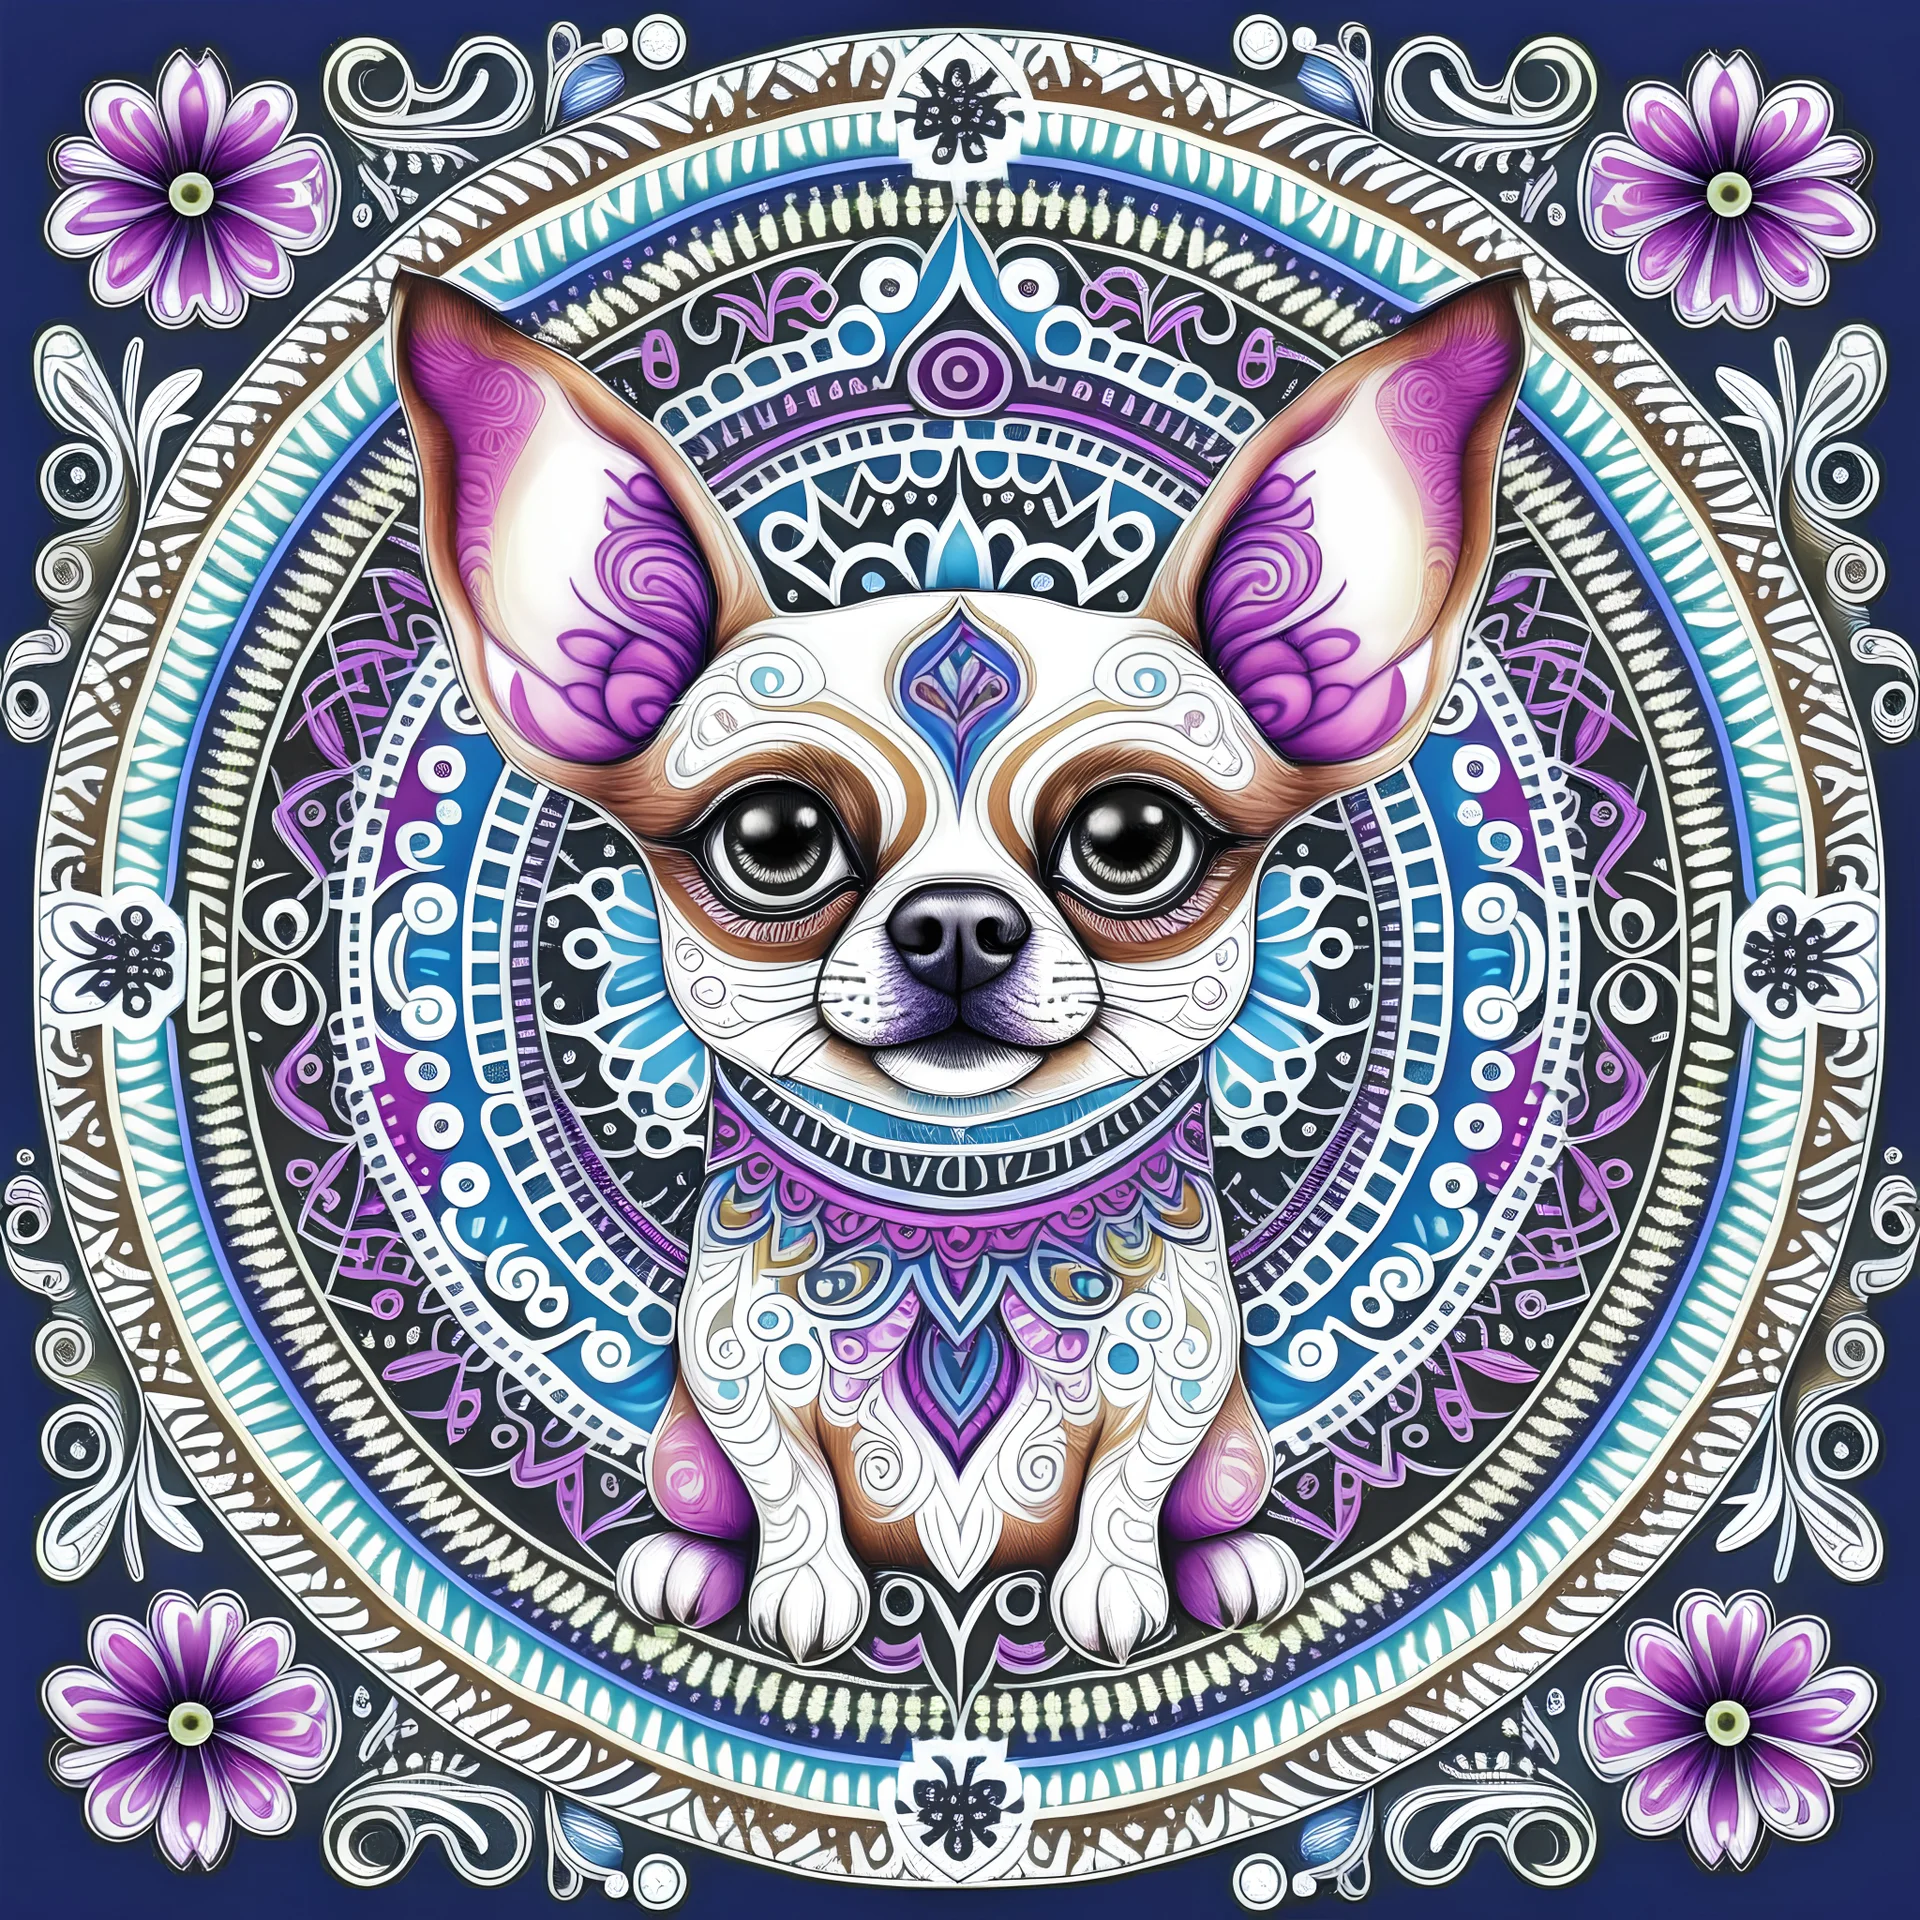 coloring pages: Whimsical Chihuahua Mandala Wonderland a whimsical Chihuahua immersed in a fantastical mandala wonderland, vibrant colors, floating mandalas, and dreamlike elements, creating an otherworldly atmosphere. The artwork, done in an illustration style reminiscent of children's storybooks, features intricate details, soft lighting, and a sense of magic. coloring page